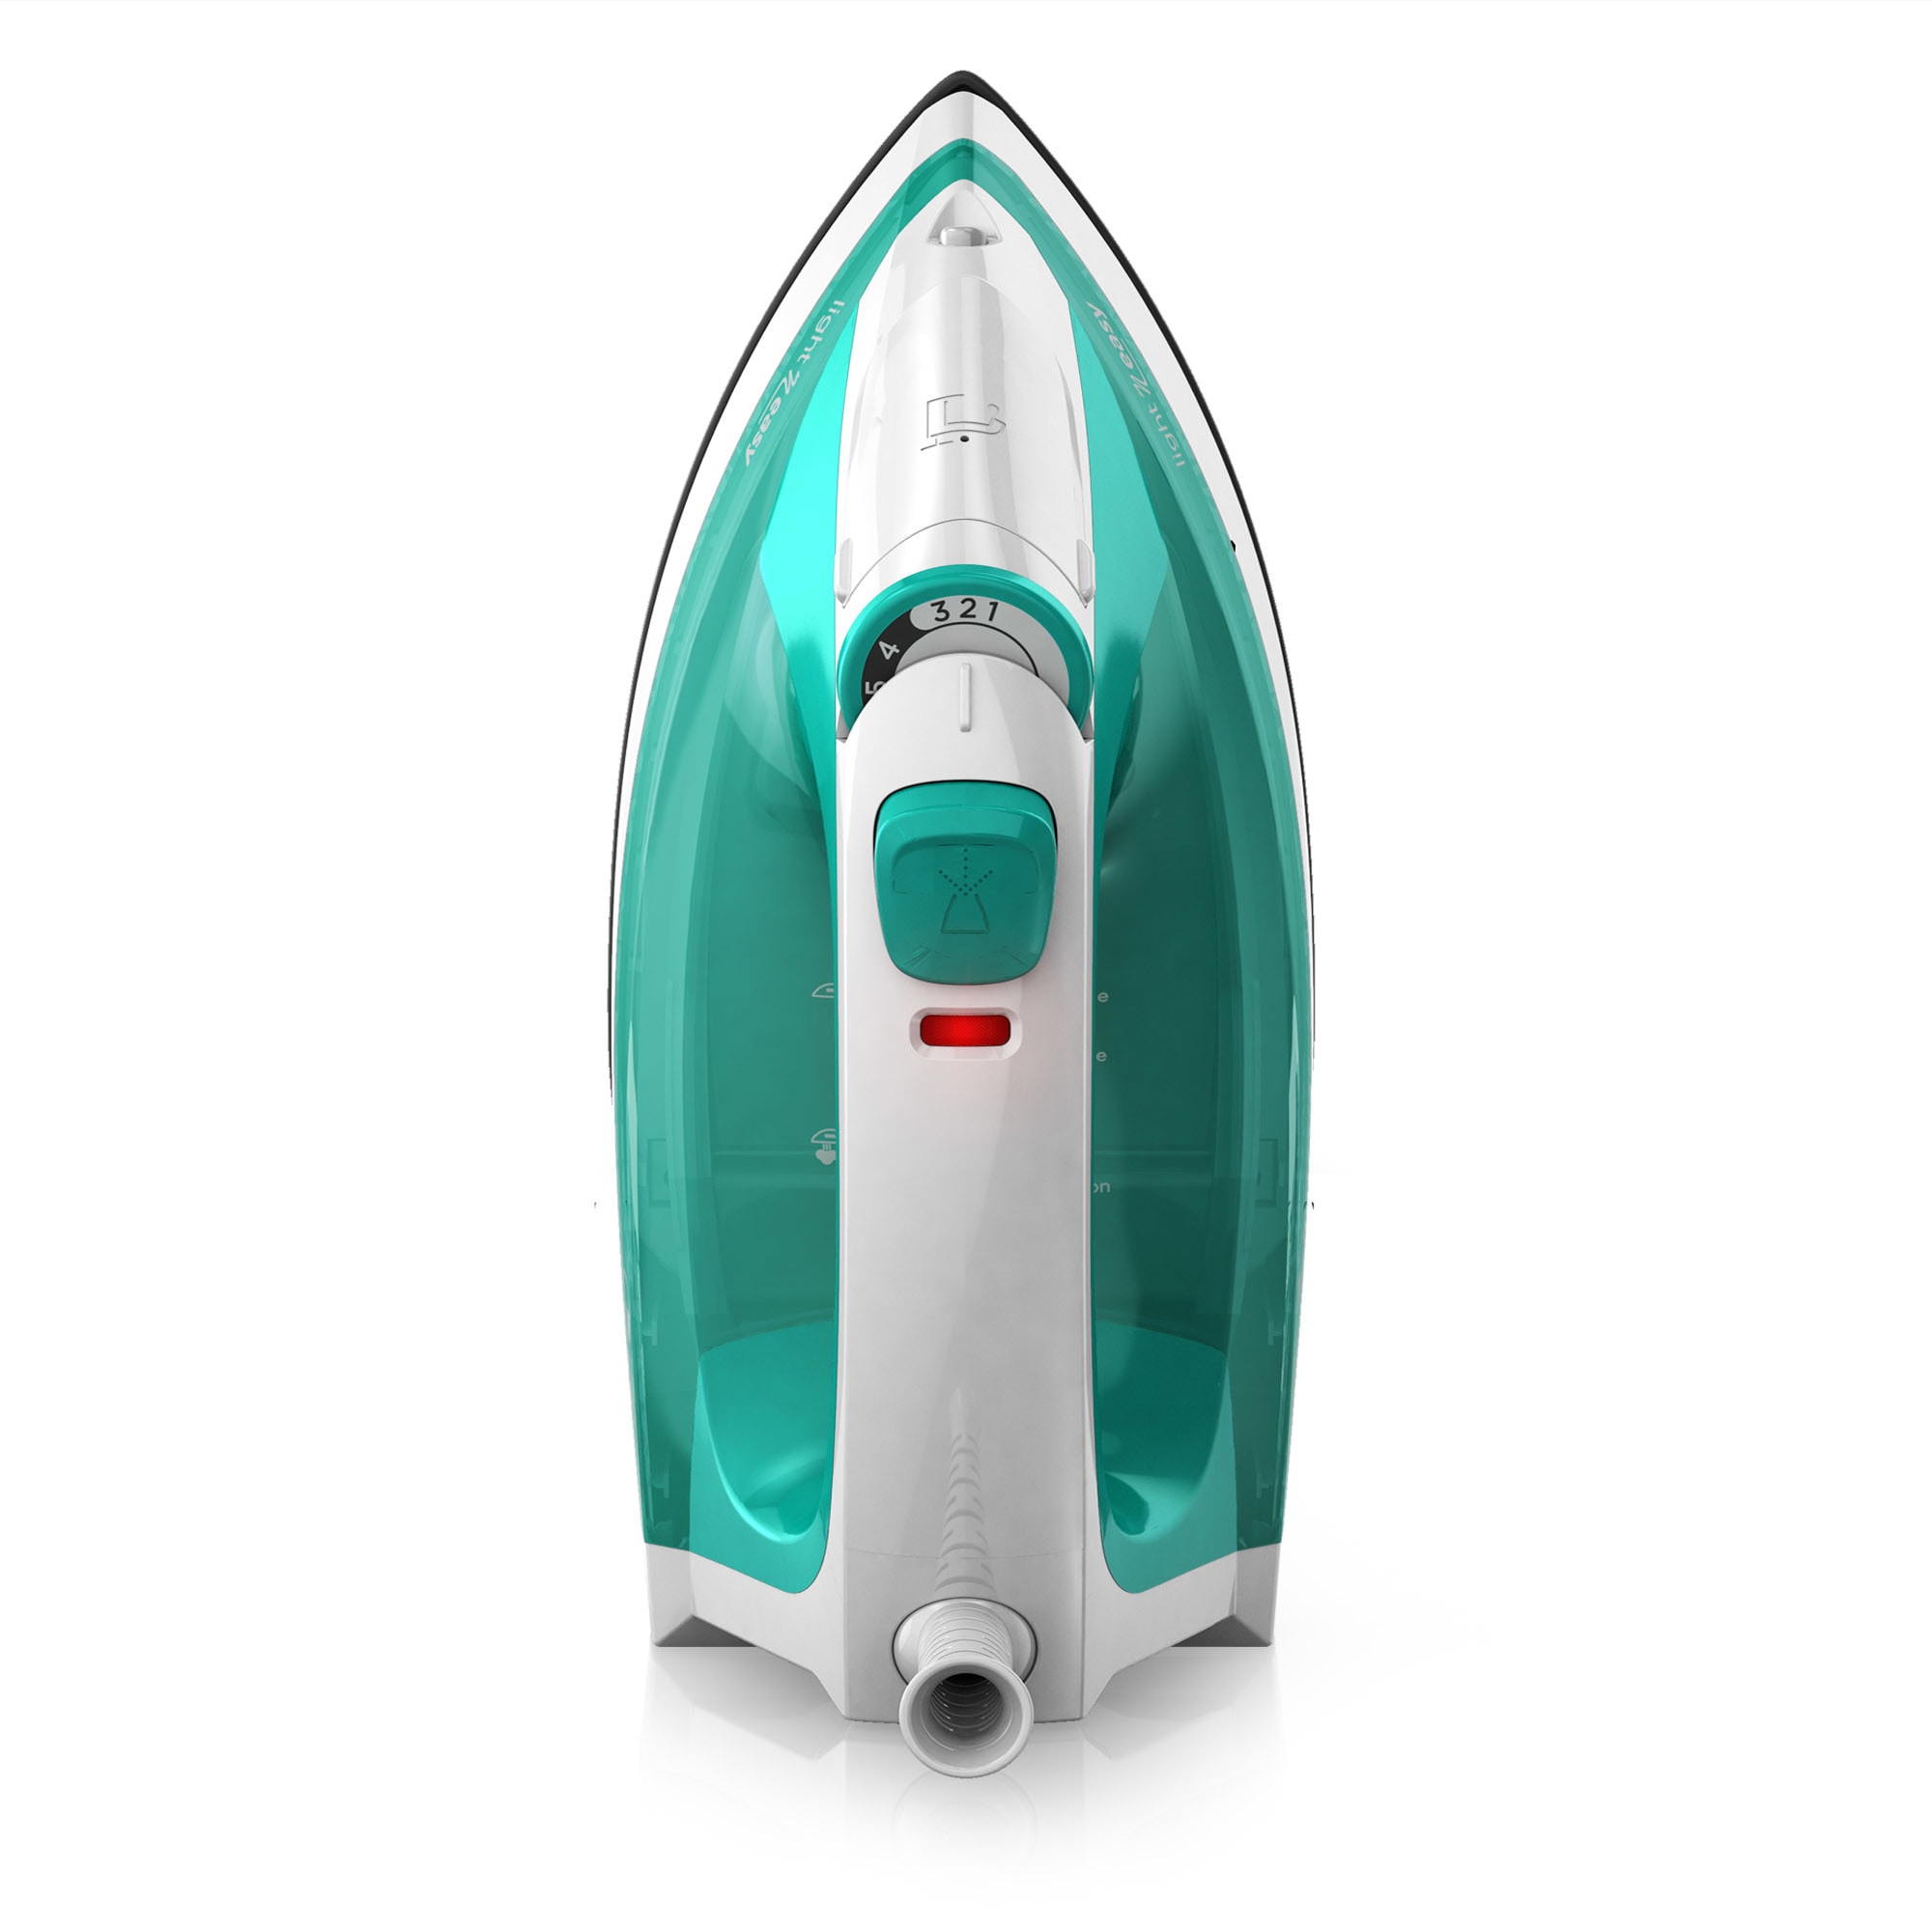 BLACK+DECKER Light 'N Easy Turquoise Auto-steam Iron Automatic Shut-off  (1200-Watt) in the Irons department at